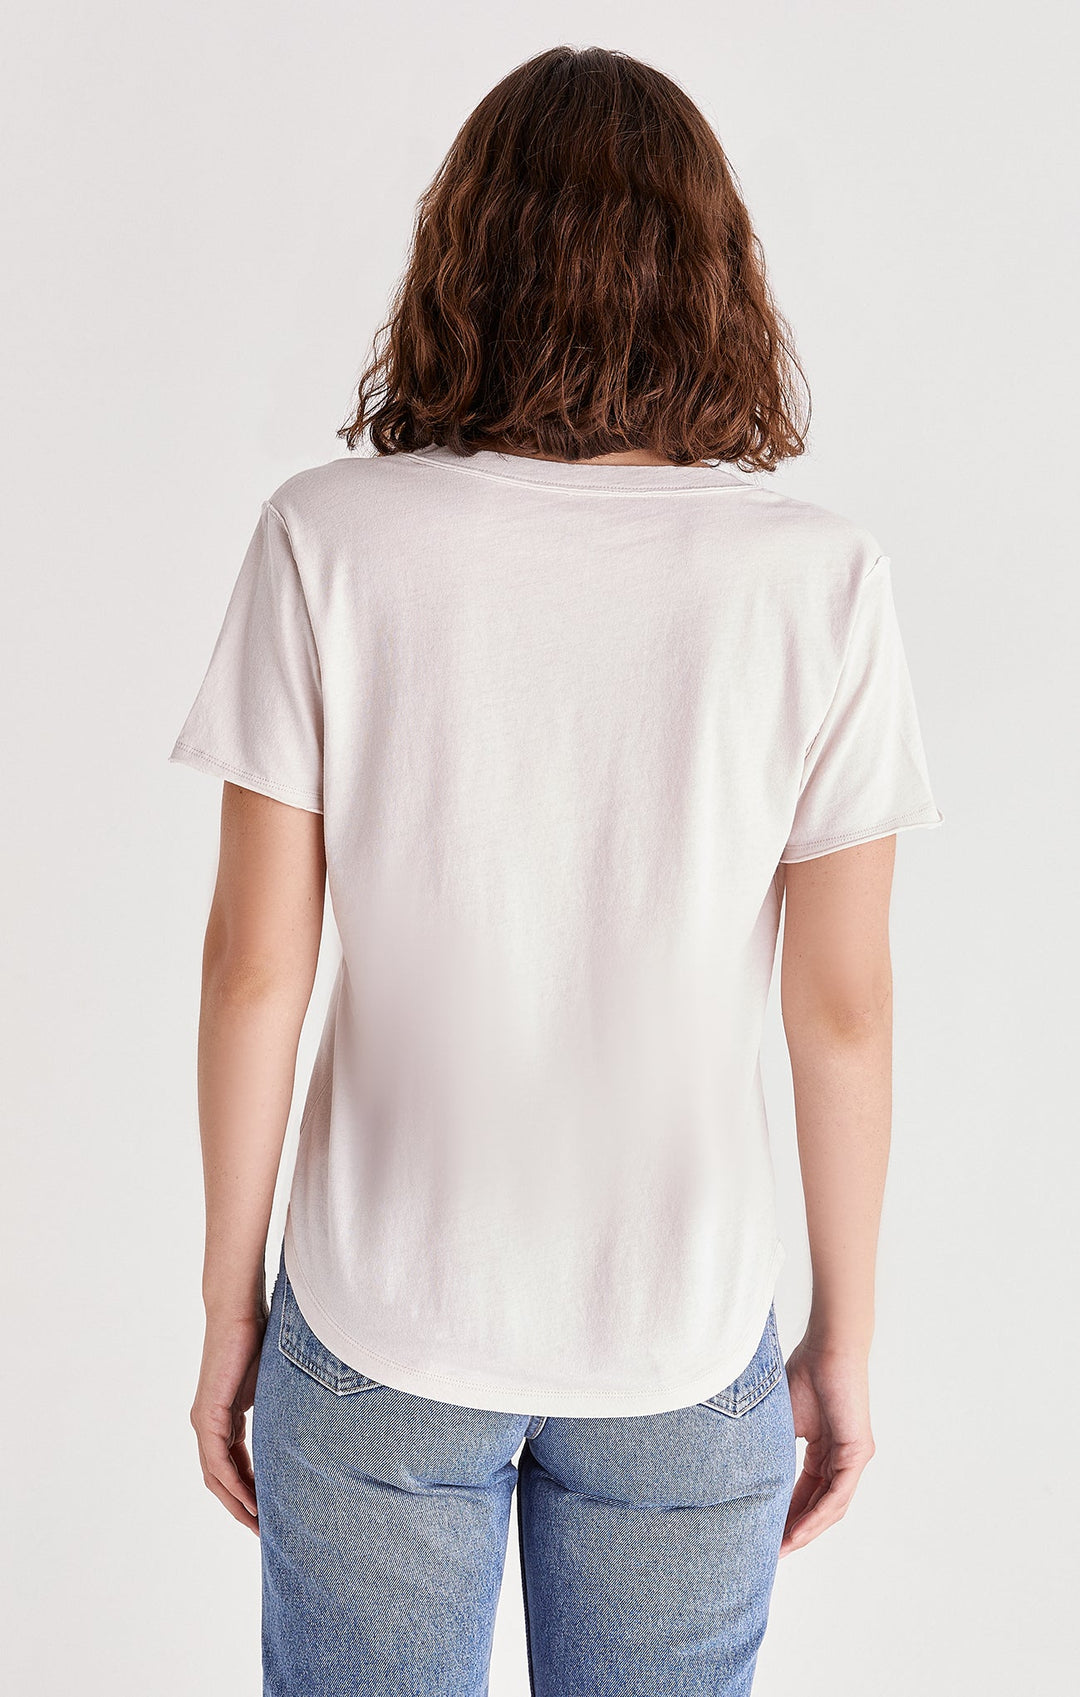 Organic Cotton V-Neck Tee - Pumice | Z Supply - Clearance